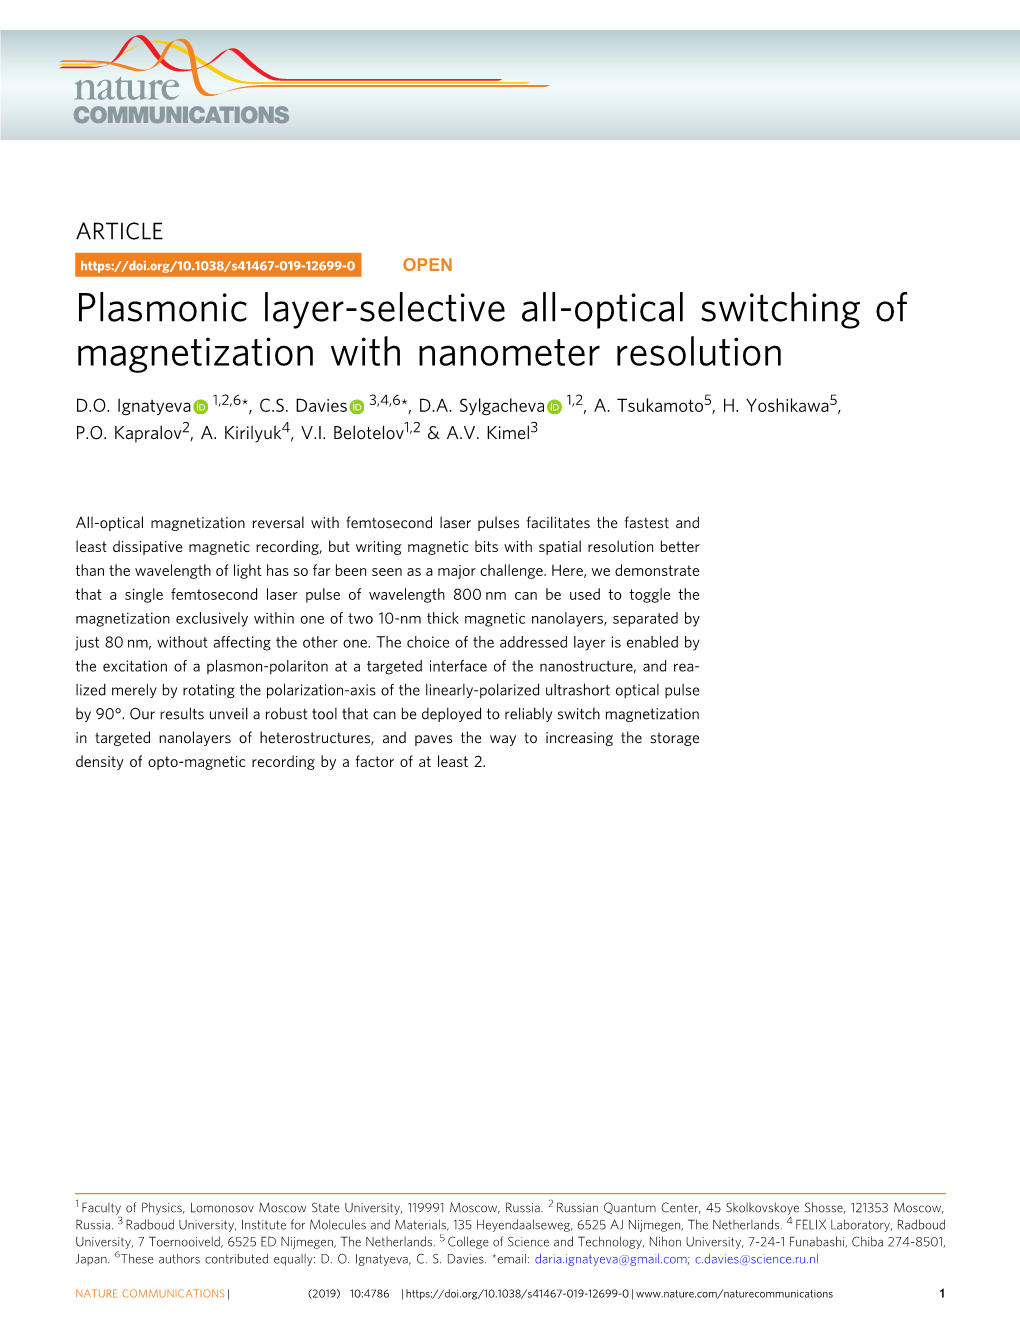 Plasmonic Layer-Selective All-Optical Switching of Magnetization with Nanometer Resolution